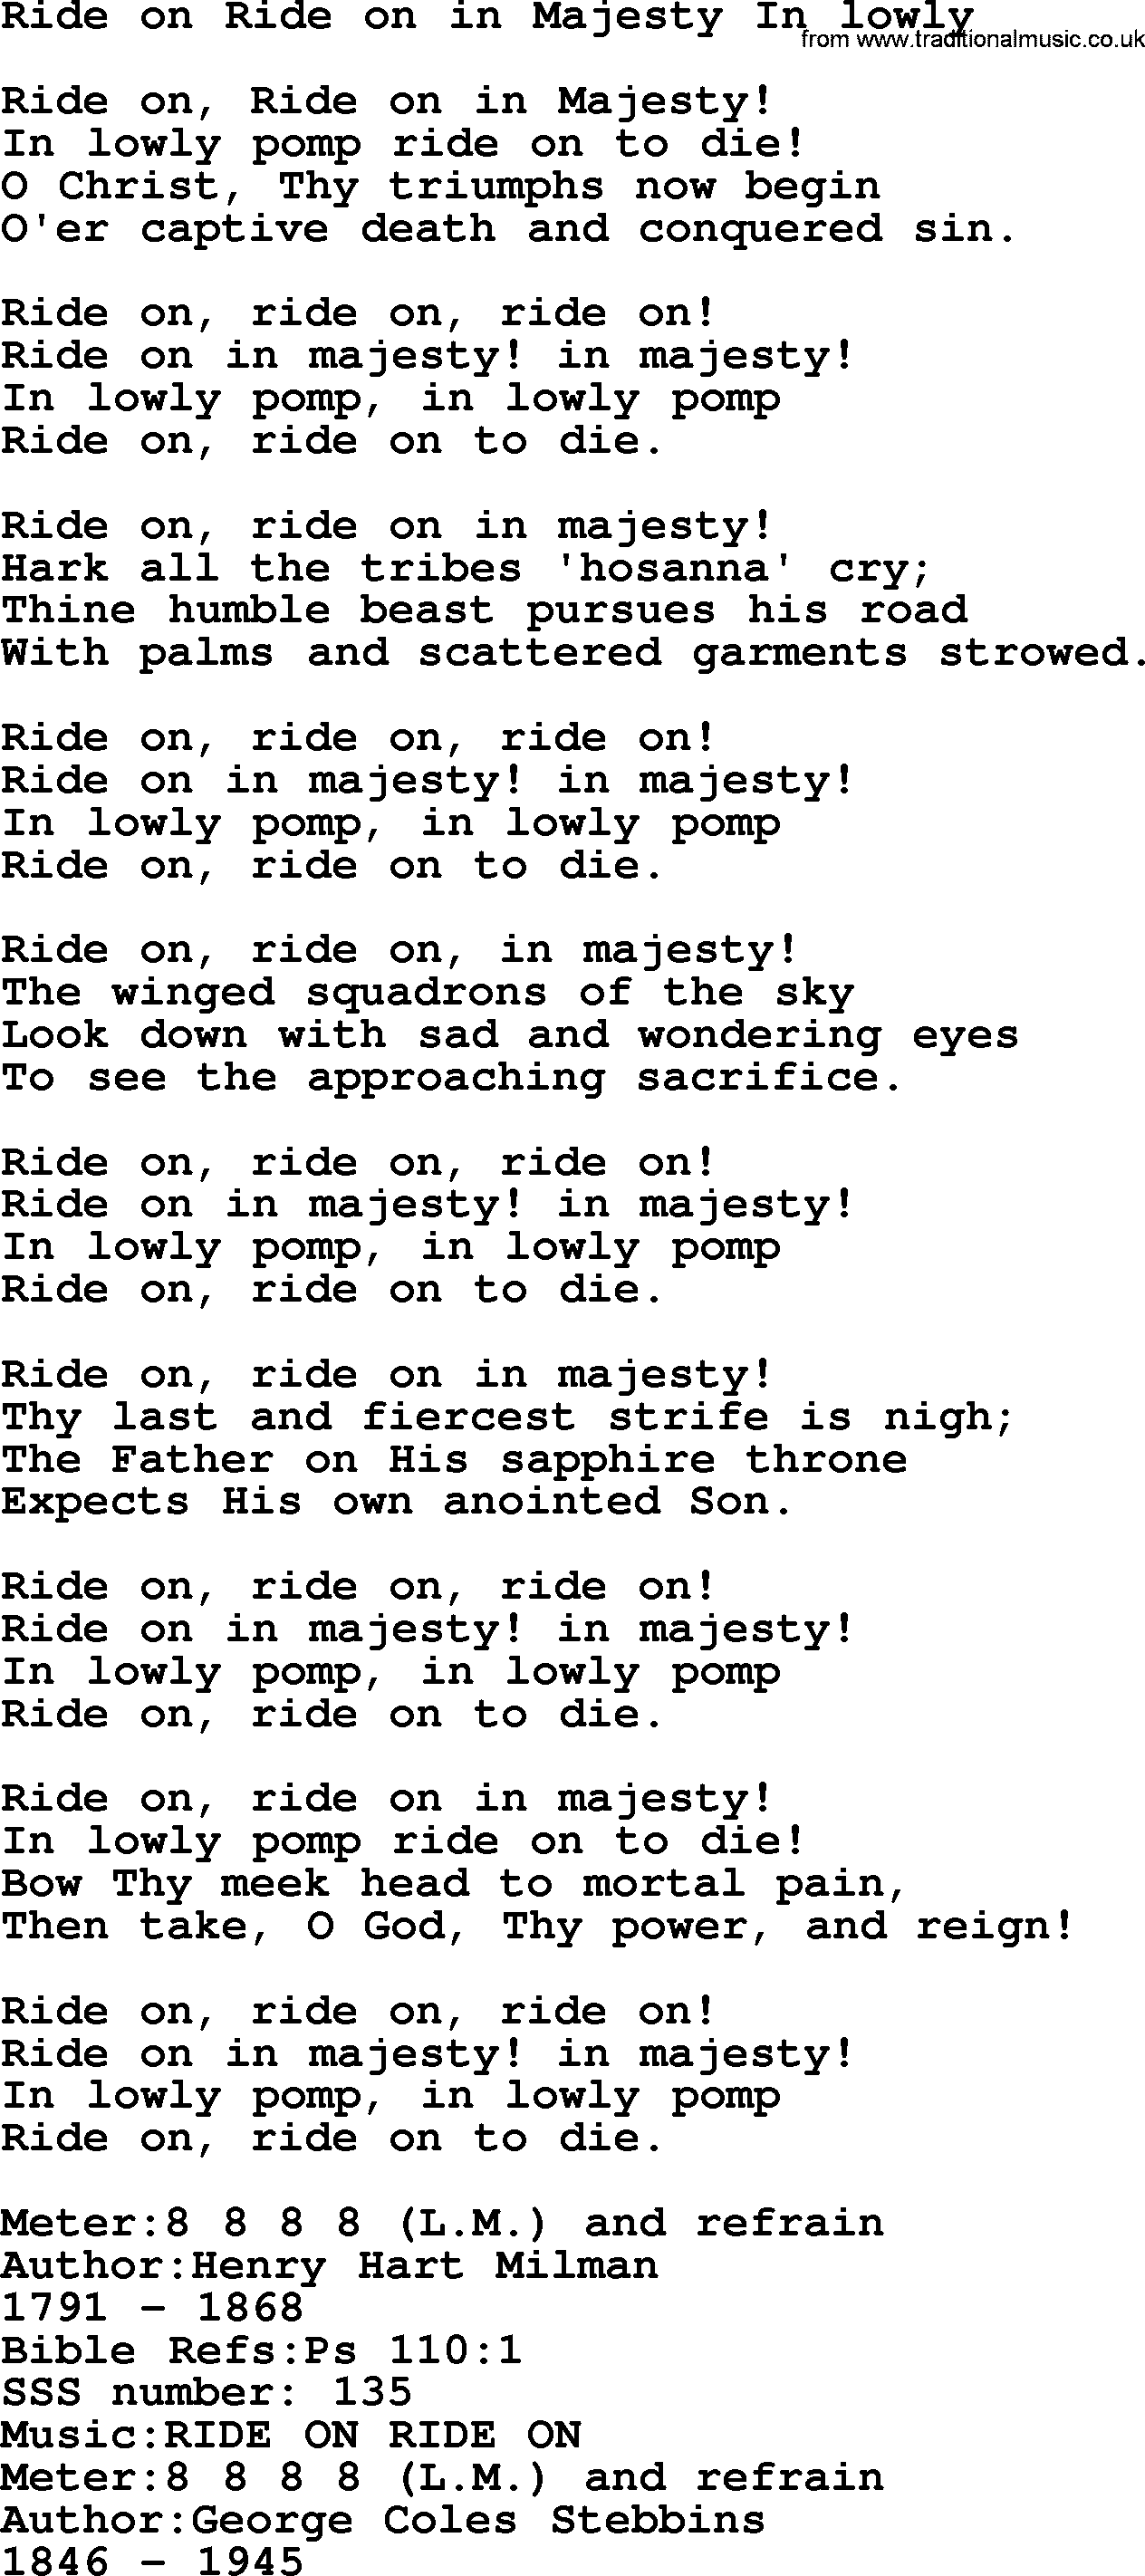 Sacred Songs and Solos complete, 1200 Hymns, title: Ride On Ride On In Majesty In Lowly, lyrics and PDF